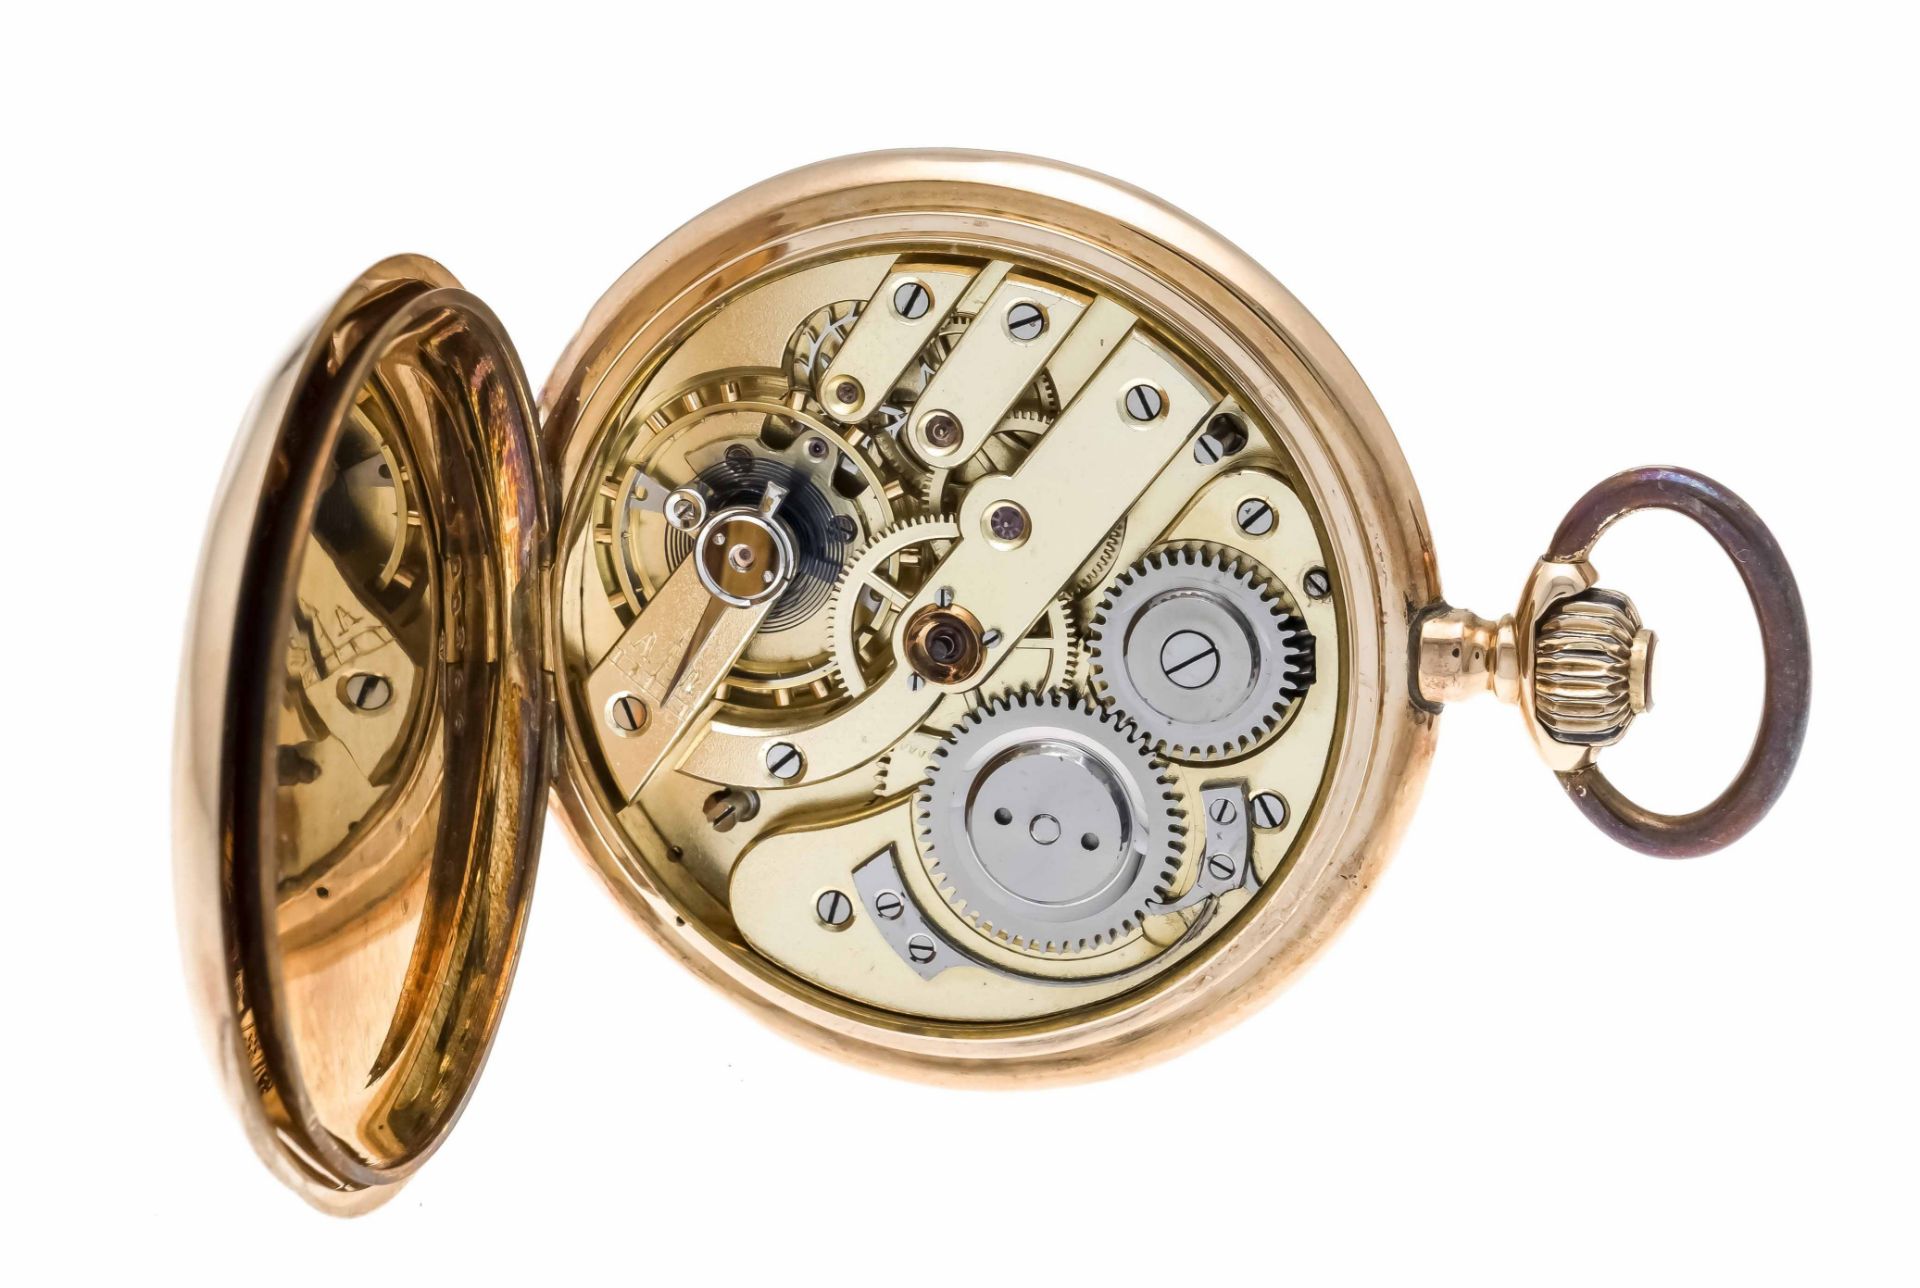 A gentleman's sprung-cap pocket watch, 585/000 GG, 2 gold covers, engine-turned case on both - Image 4 of 5